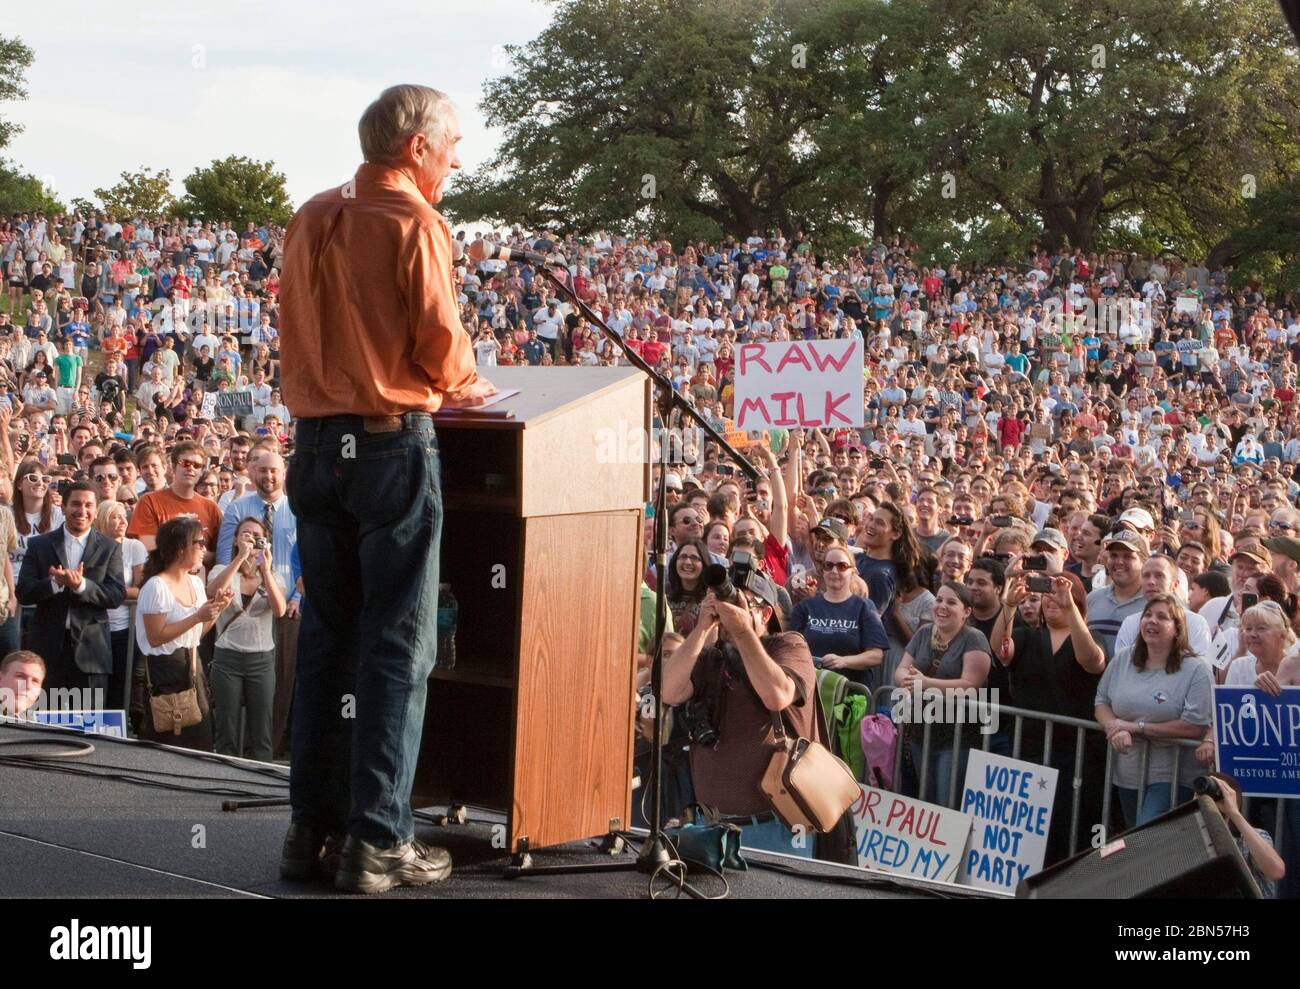 Austin Texas USA, April 26 2012: Republican presidential hopeful Ron Paul gives a campaign speech outside the LBJ Library on the University of Texas at Austin campus. The crowd was estimated to be in the thousands. ©Marjorie Kamys Cotera/Daemmrich Photography Stock Photo